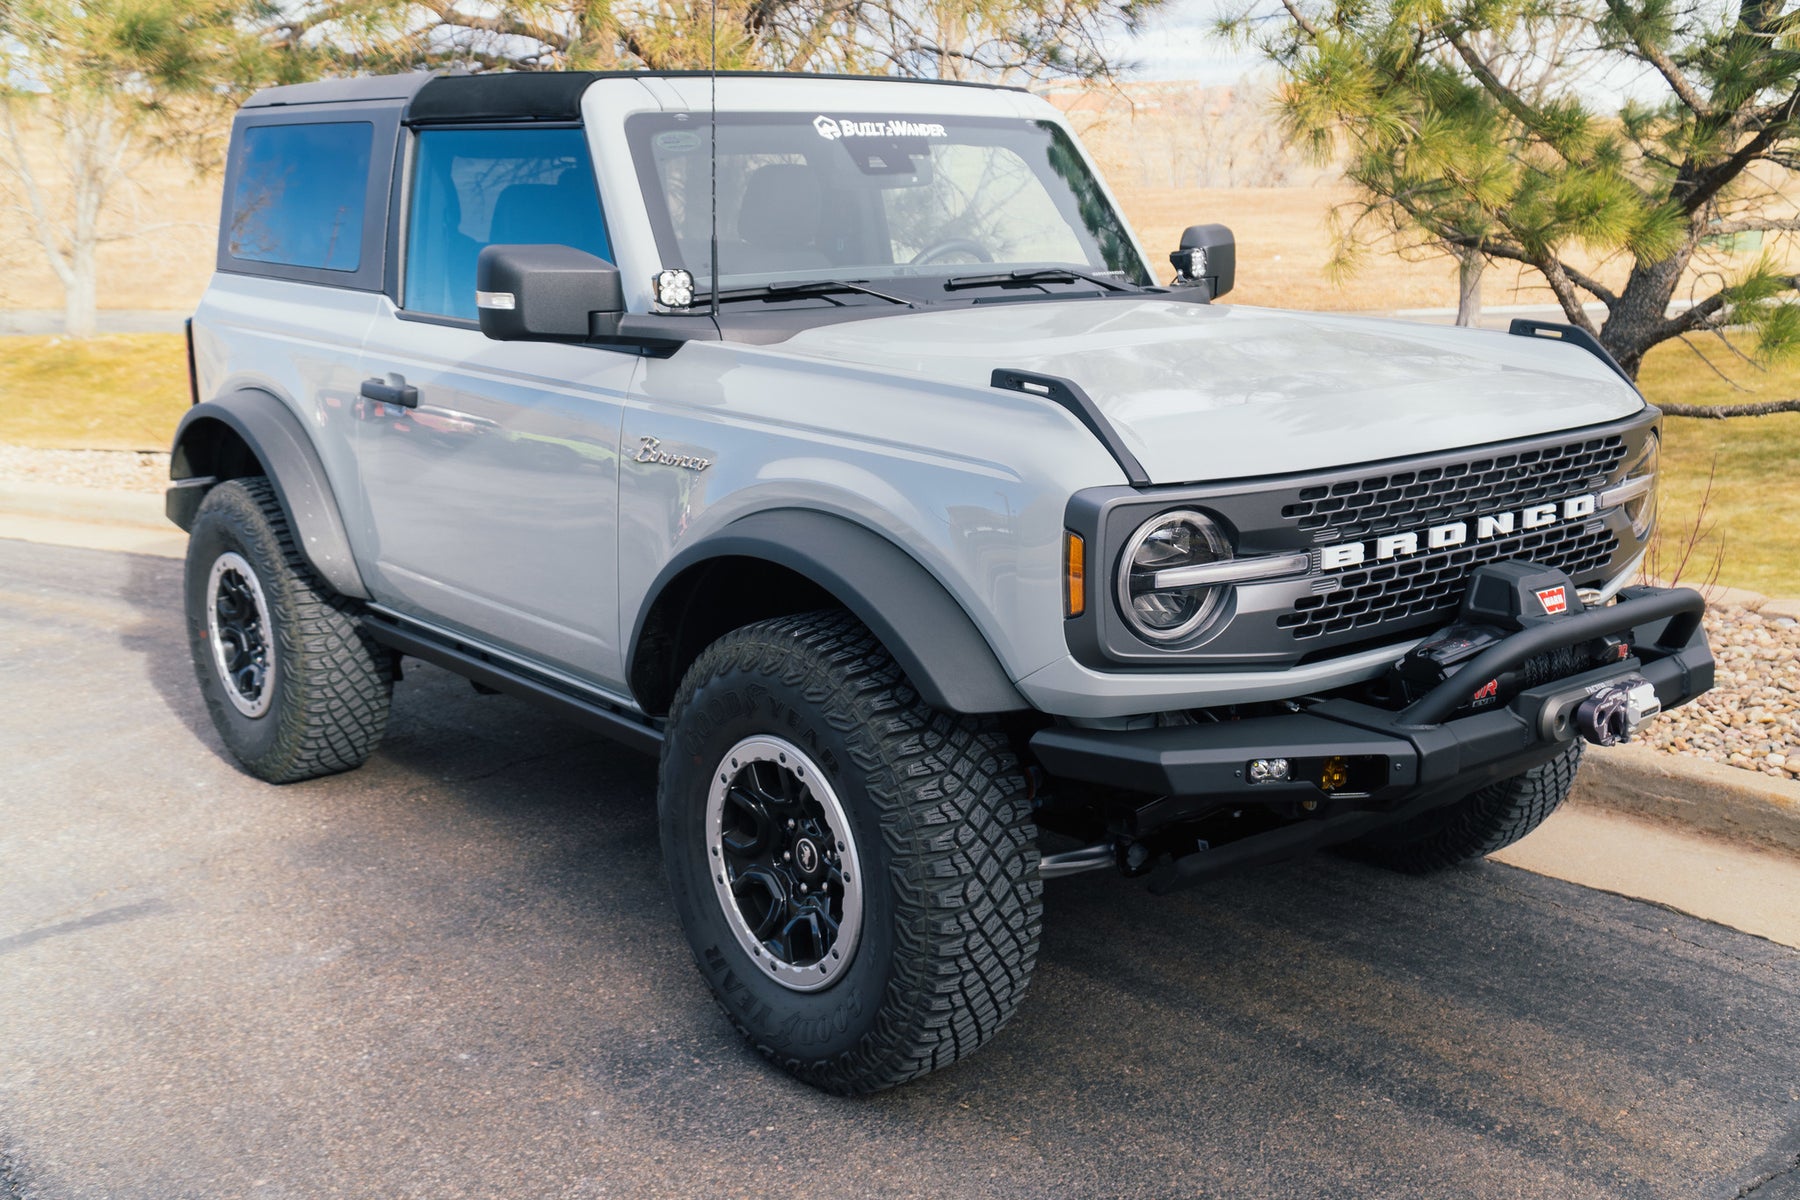 Ford Parts & Accessories For Off-Roading in Colorado Springs